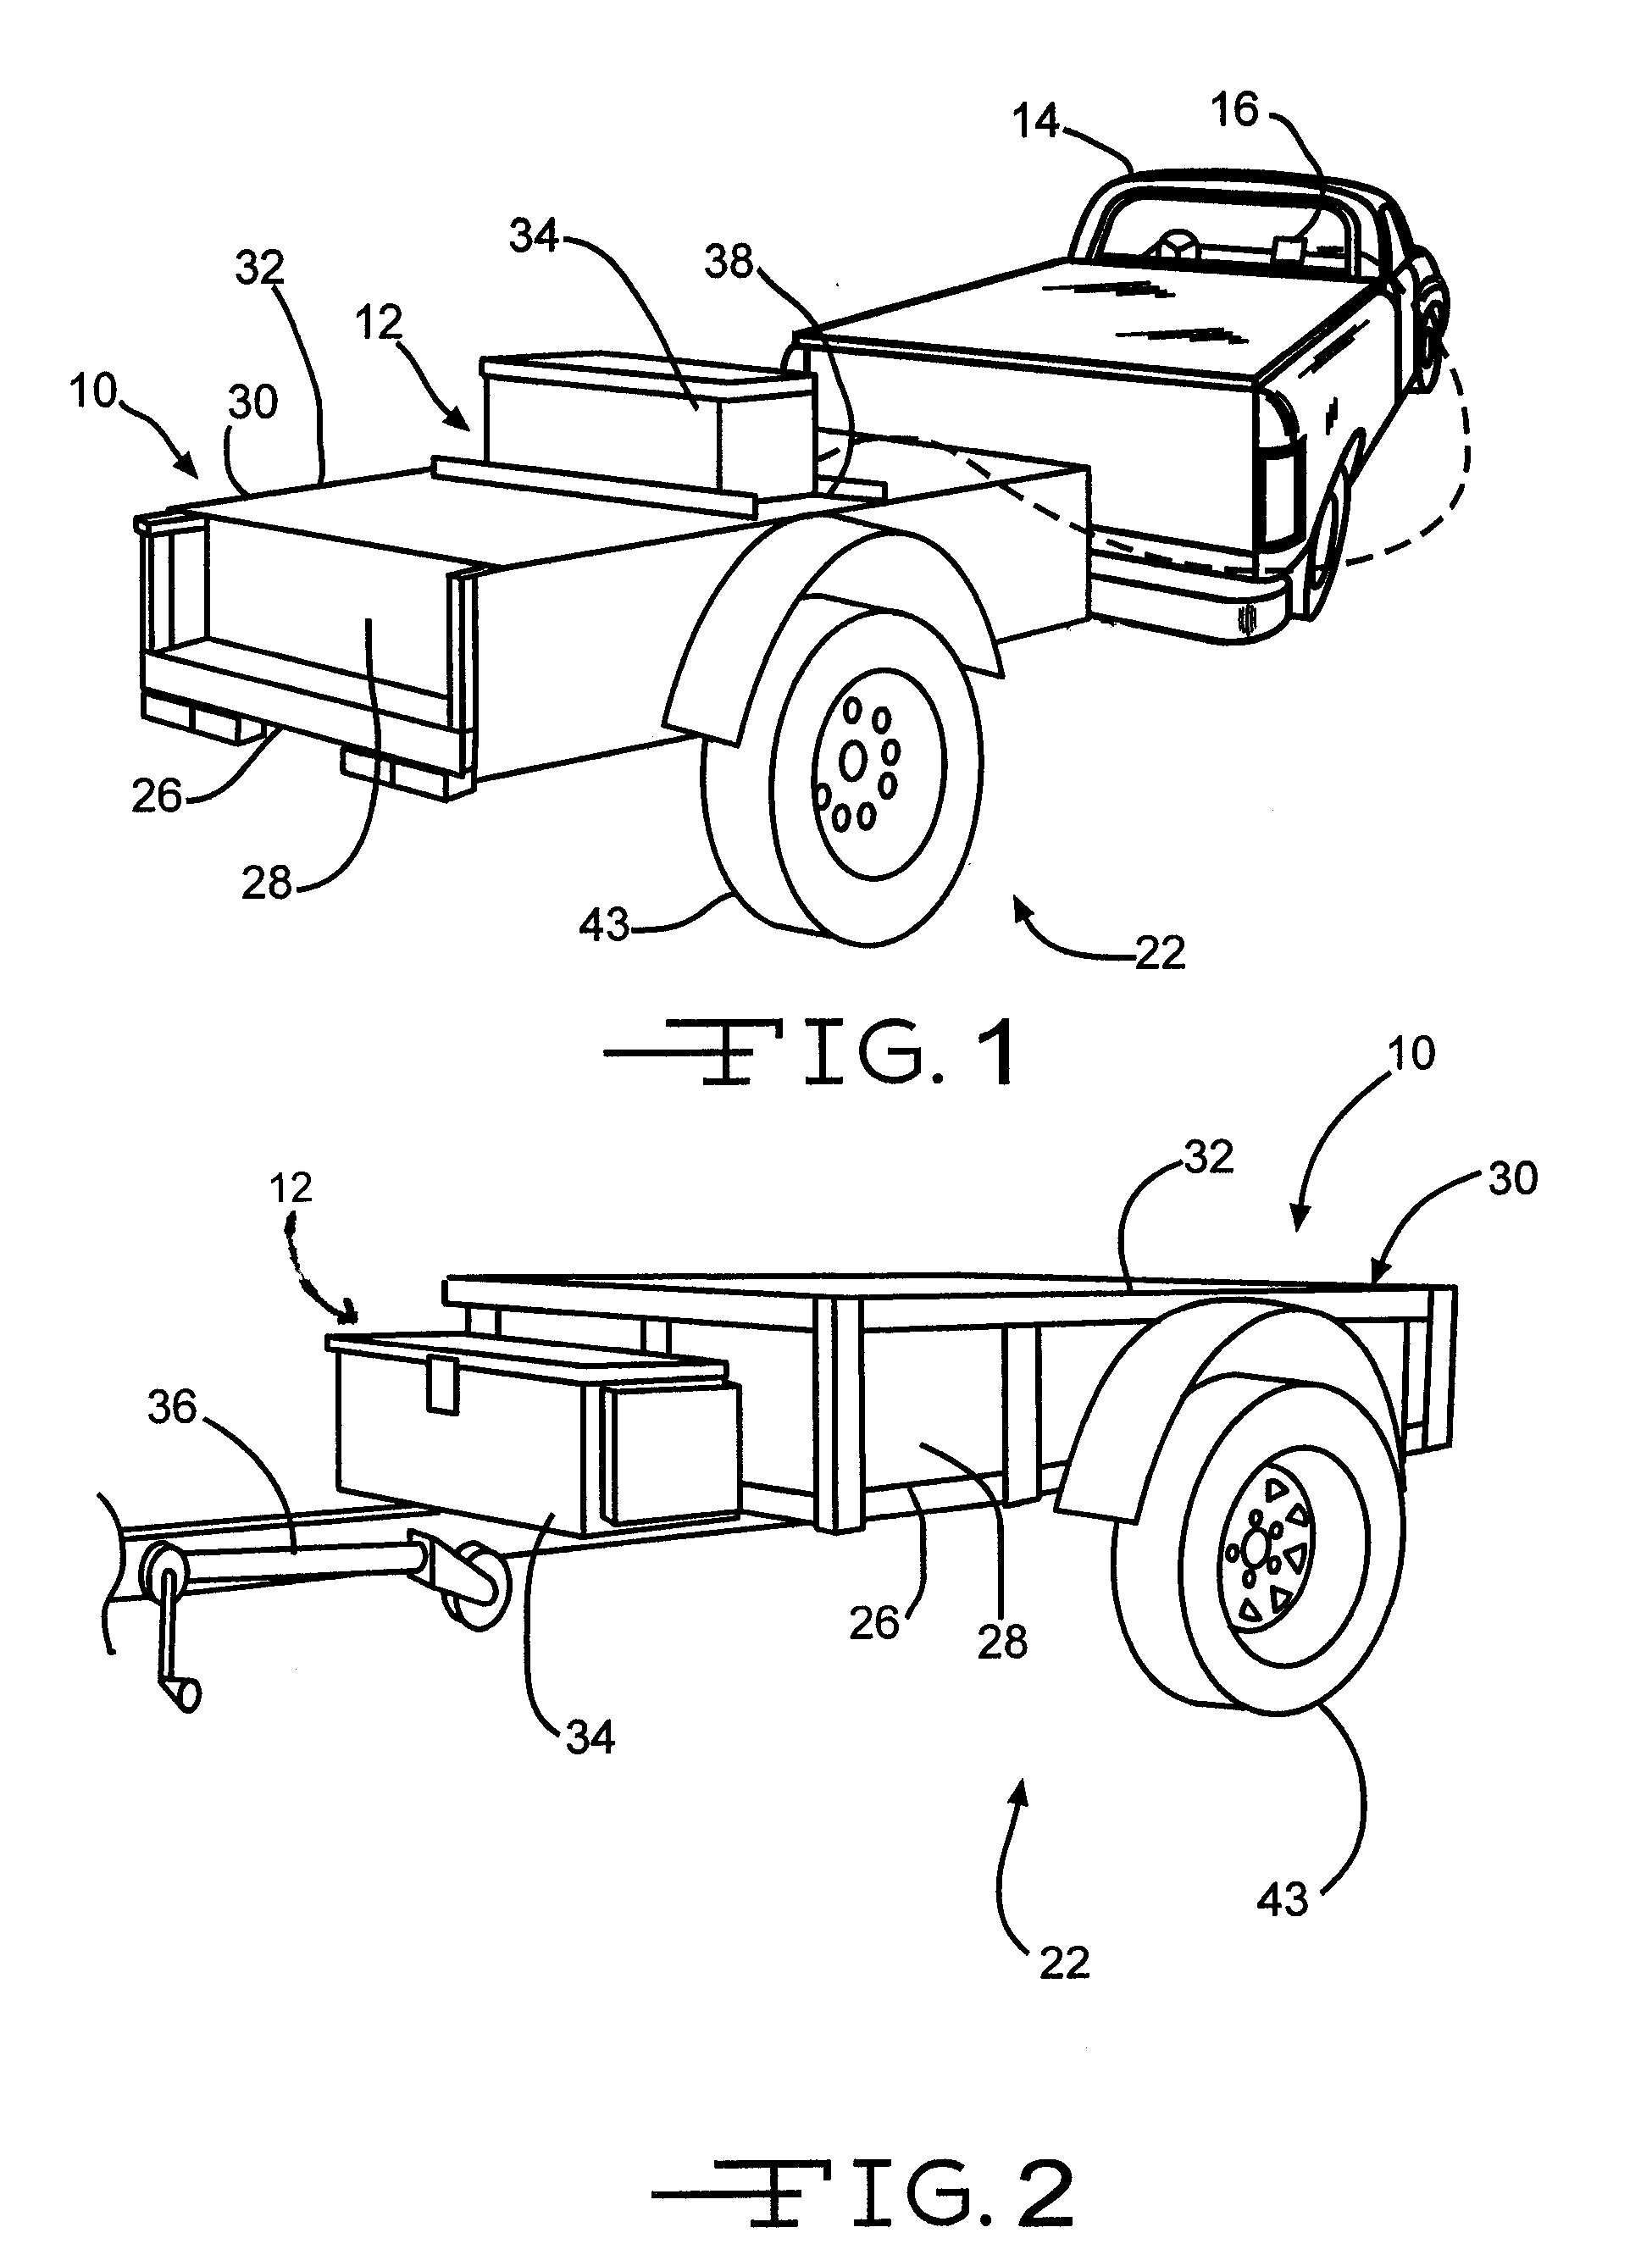 Trailer with Integral Axle-Mounted Generator and Battery Charger